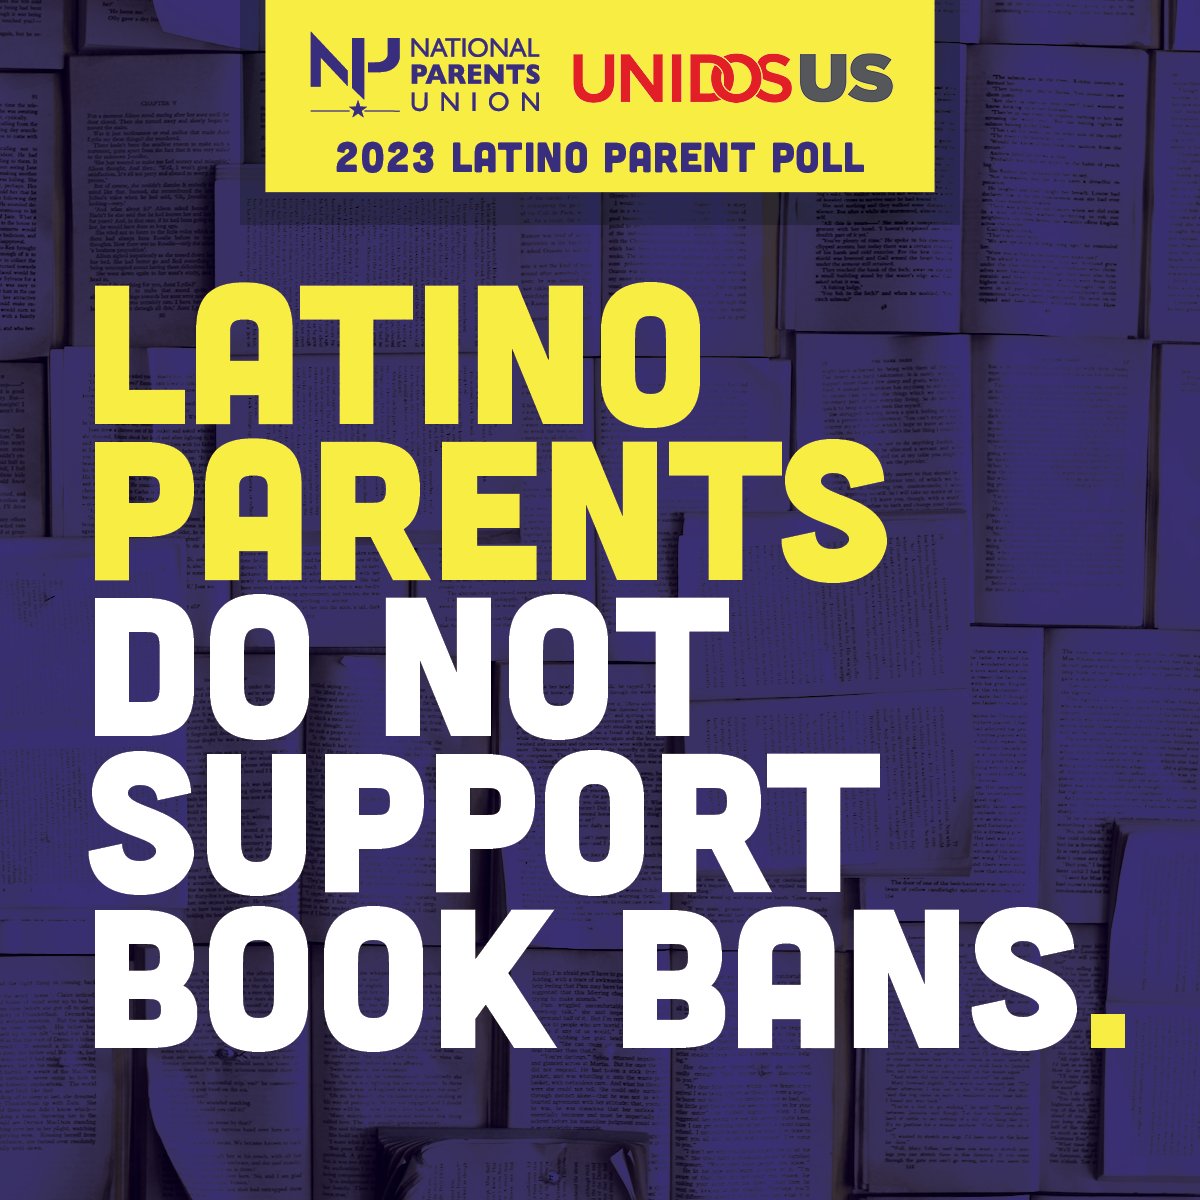 Only 15% of Latino parents think they should have the power to prevent all students at their child’s school from having access to curriculum they object to. This goes to show the “book ban movement” is more like a weak trickle. #ParentPoll